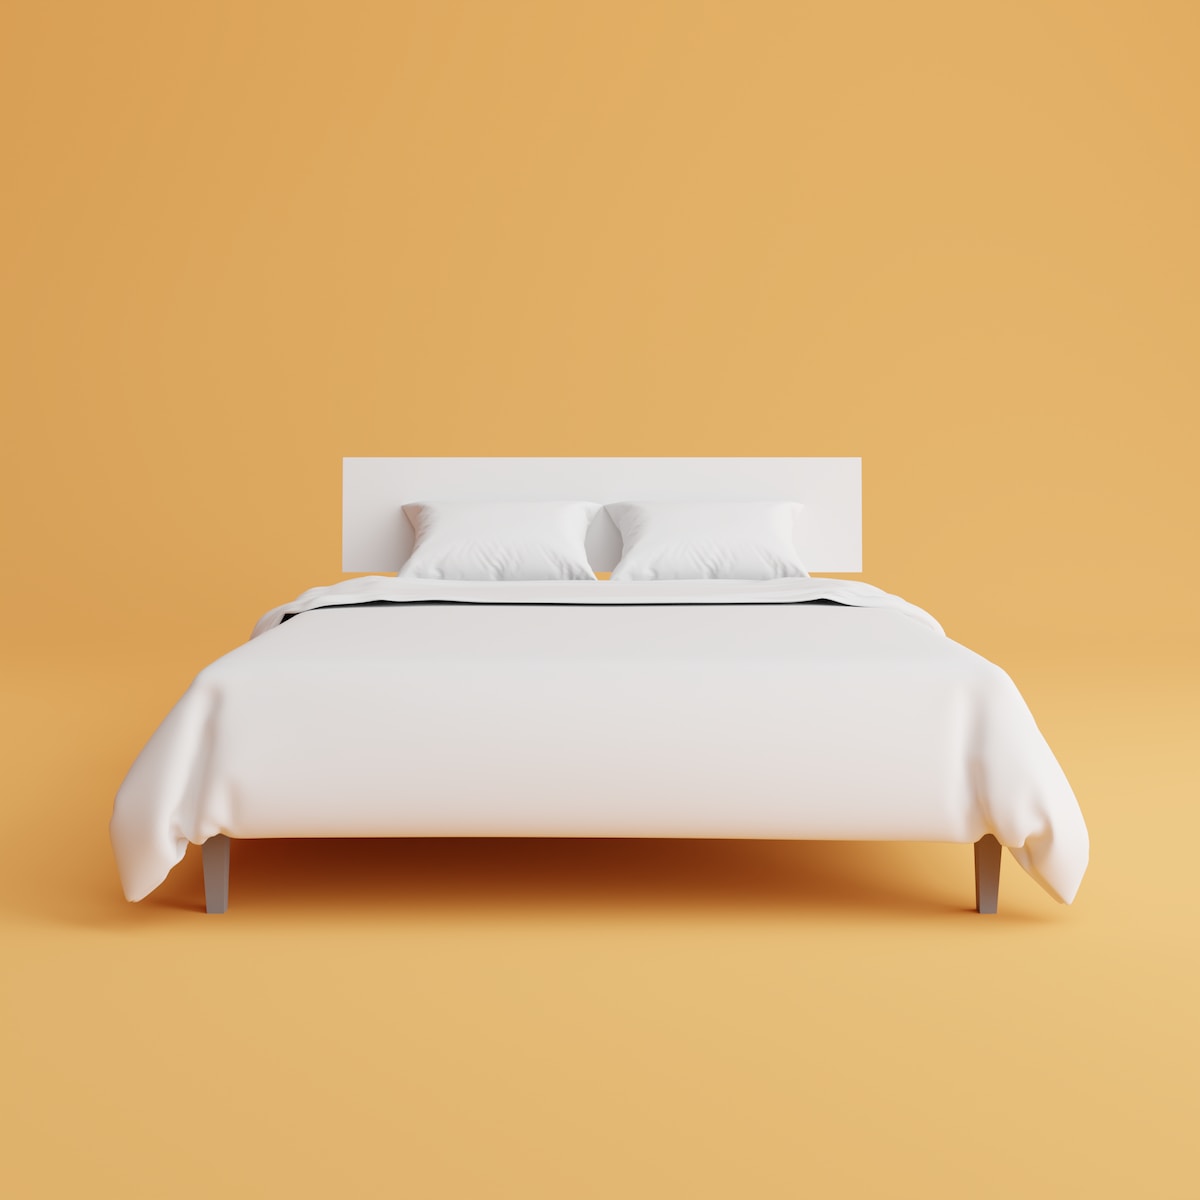 a bed with a white cover and pillows on top of it